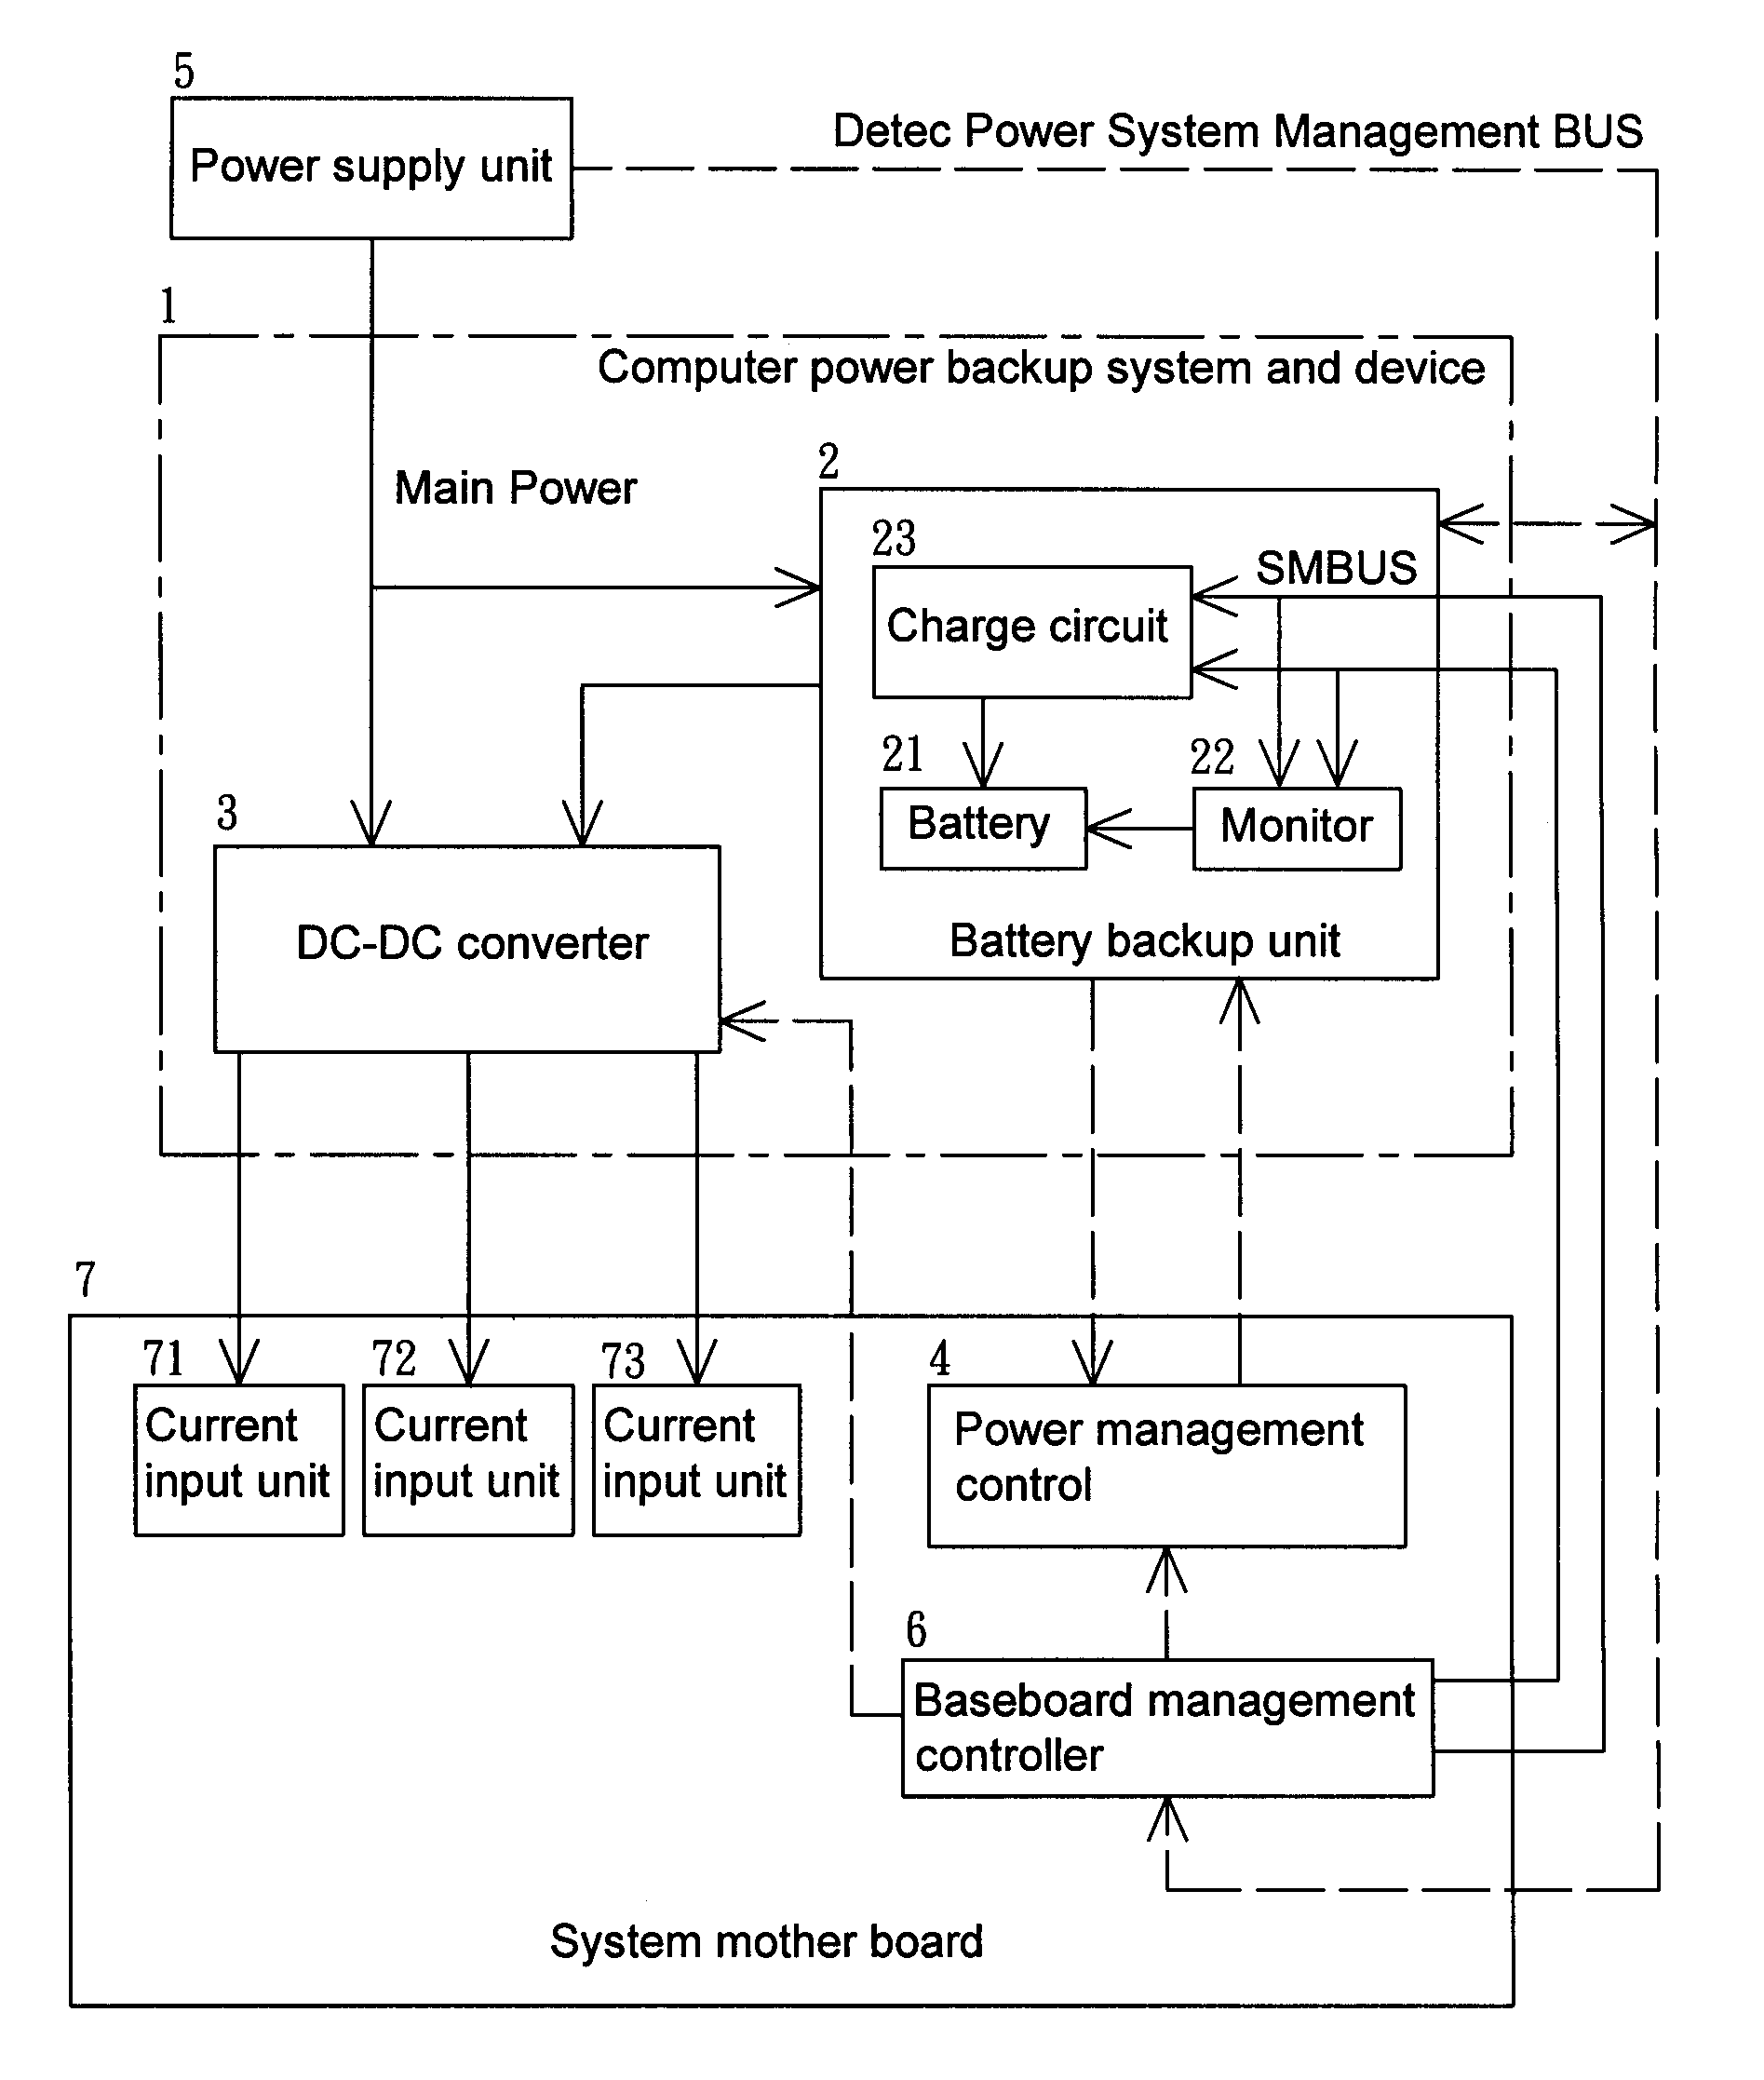 Computer power backup system and device